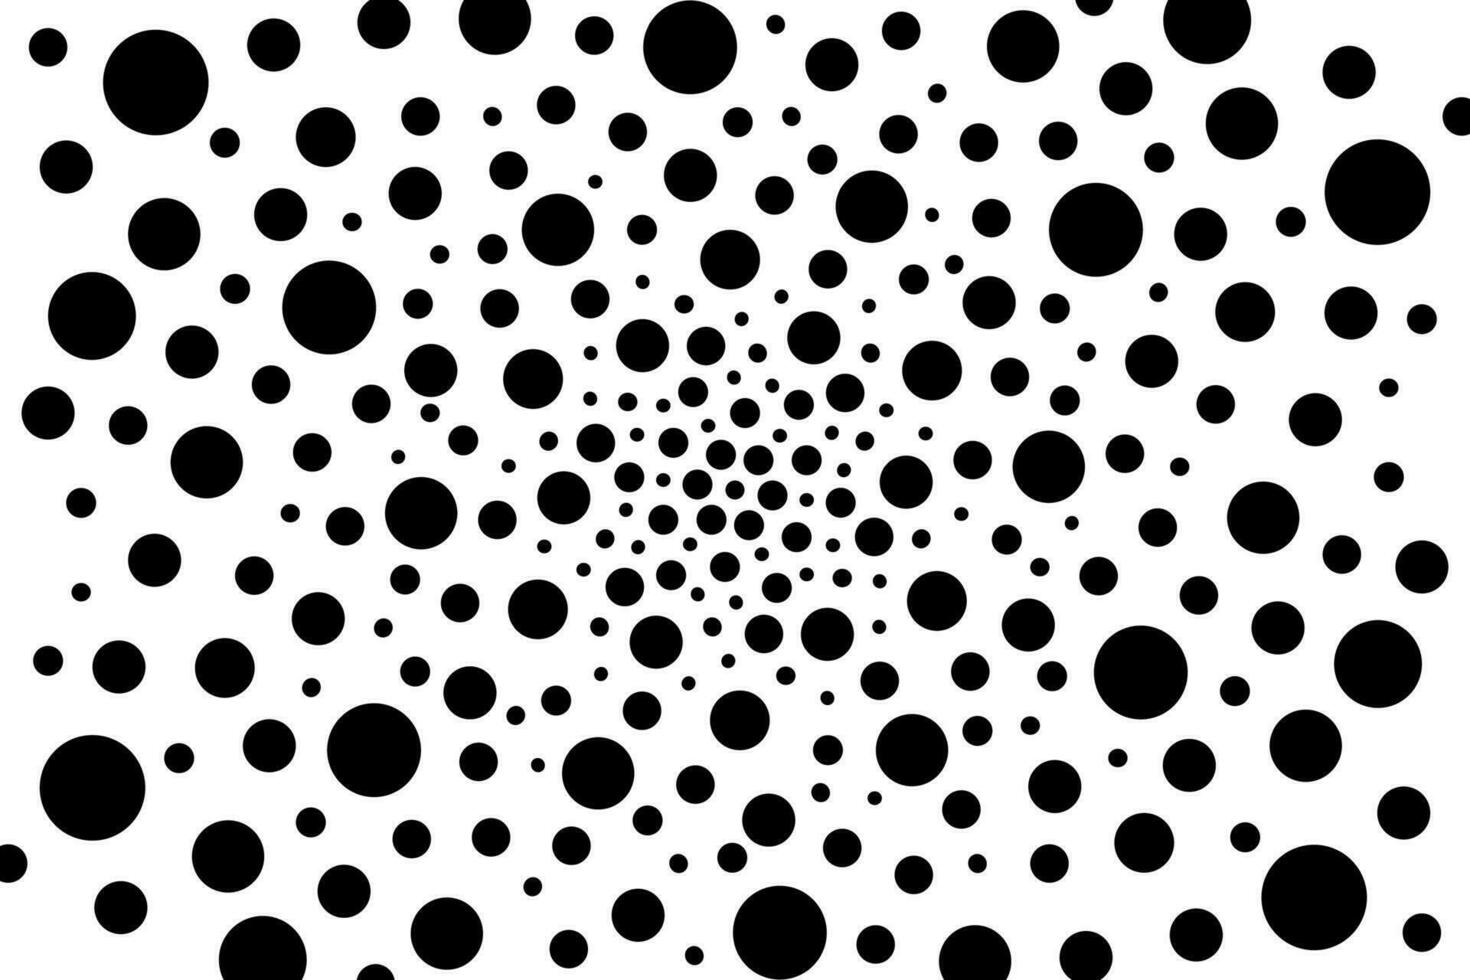 Background pattern of black dots of different sizes on white background vector